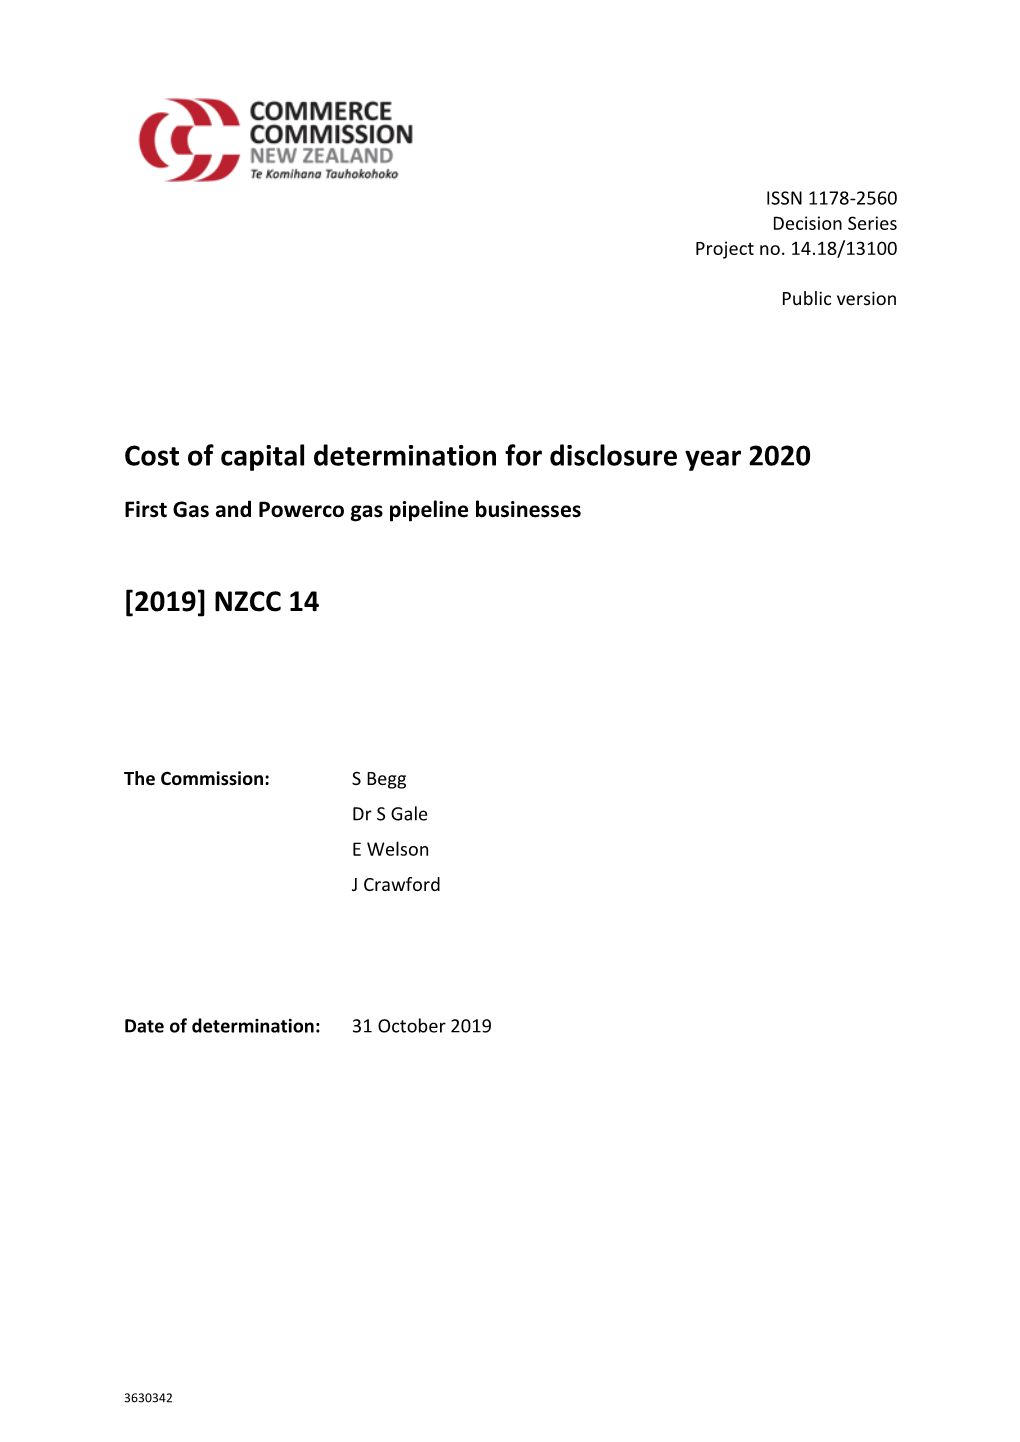 Cost of Capital Determination for Disclosure Year 2020 [2019] NZCC 14